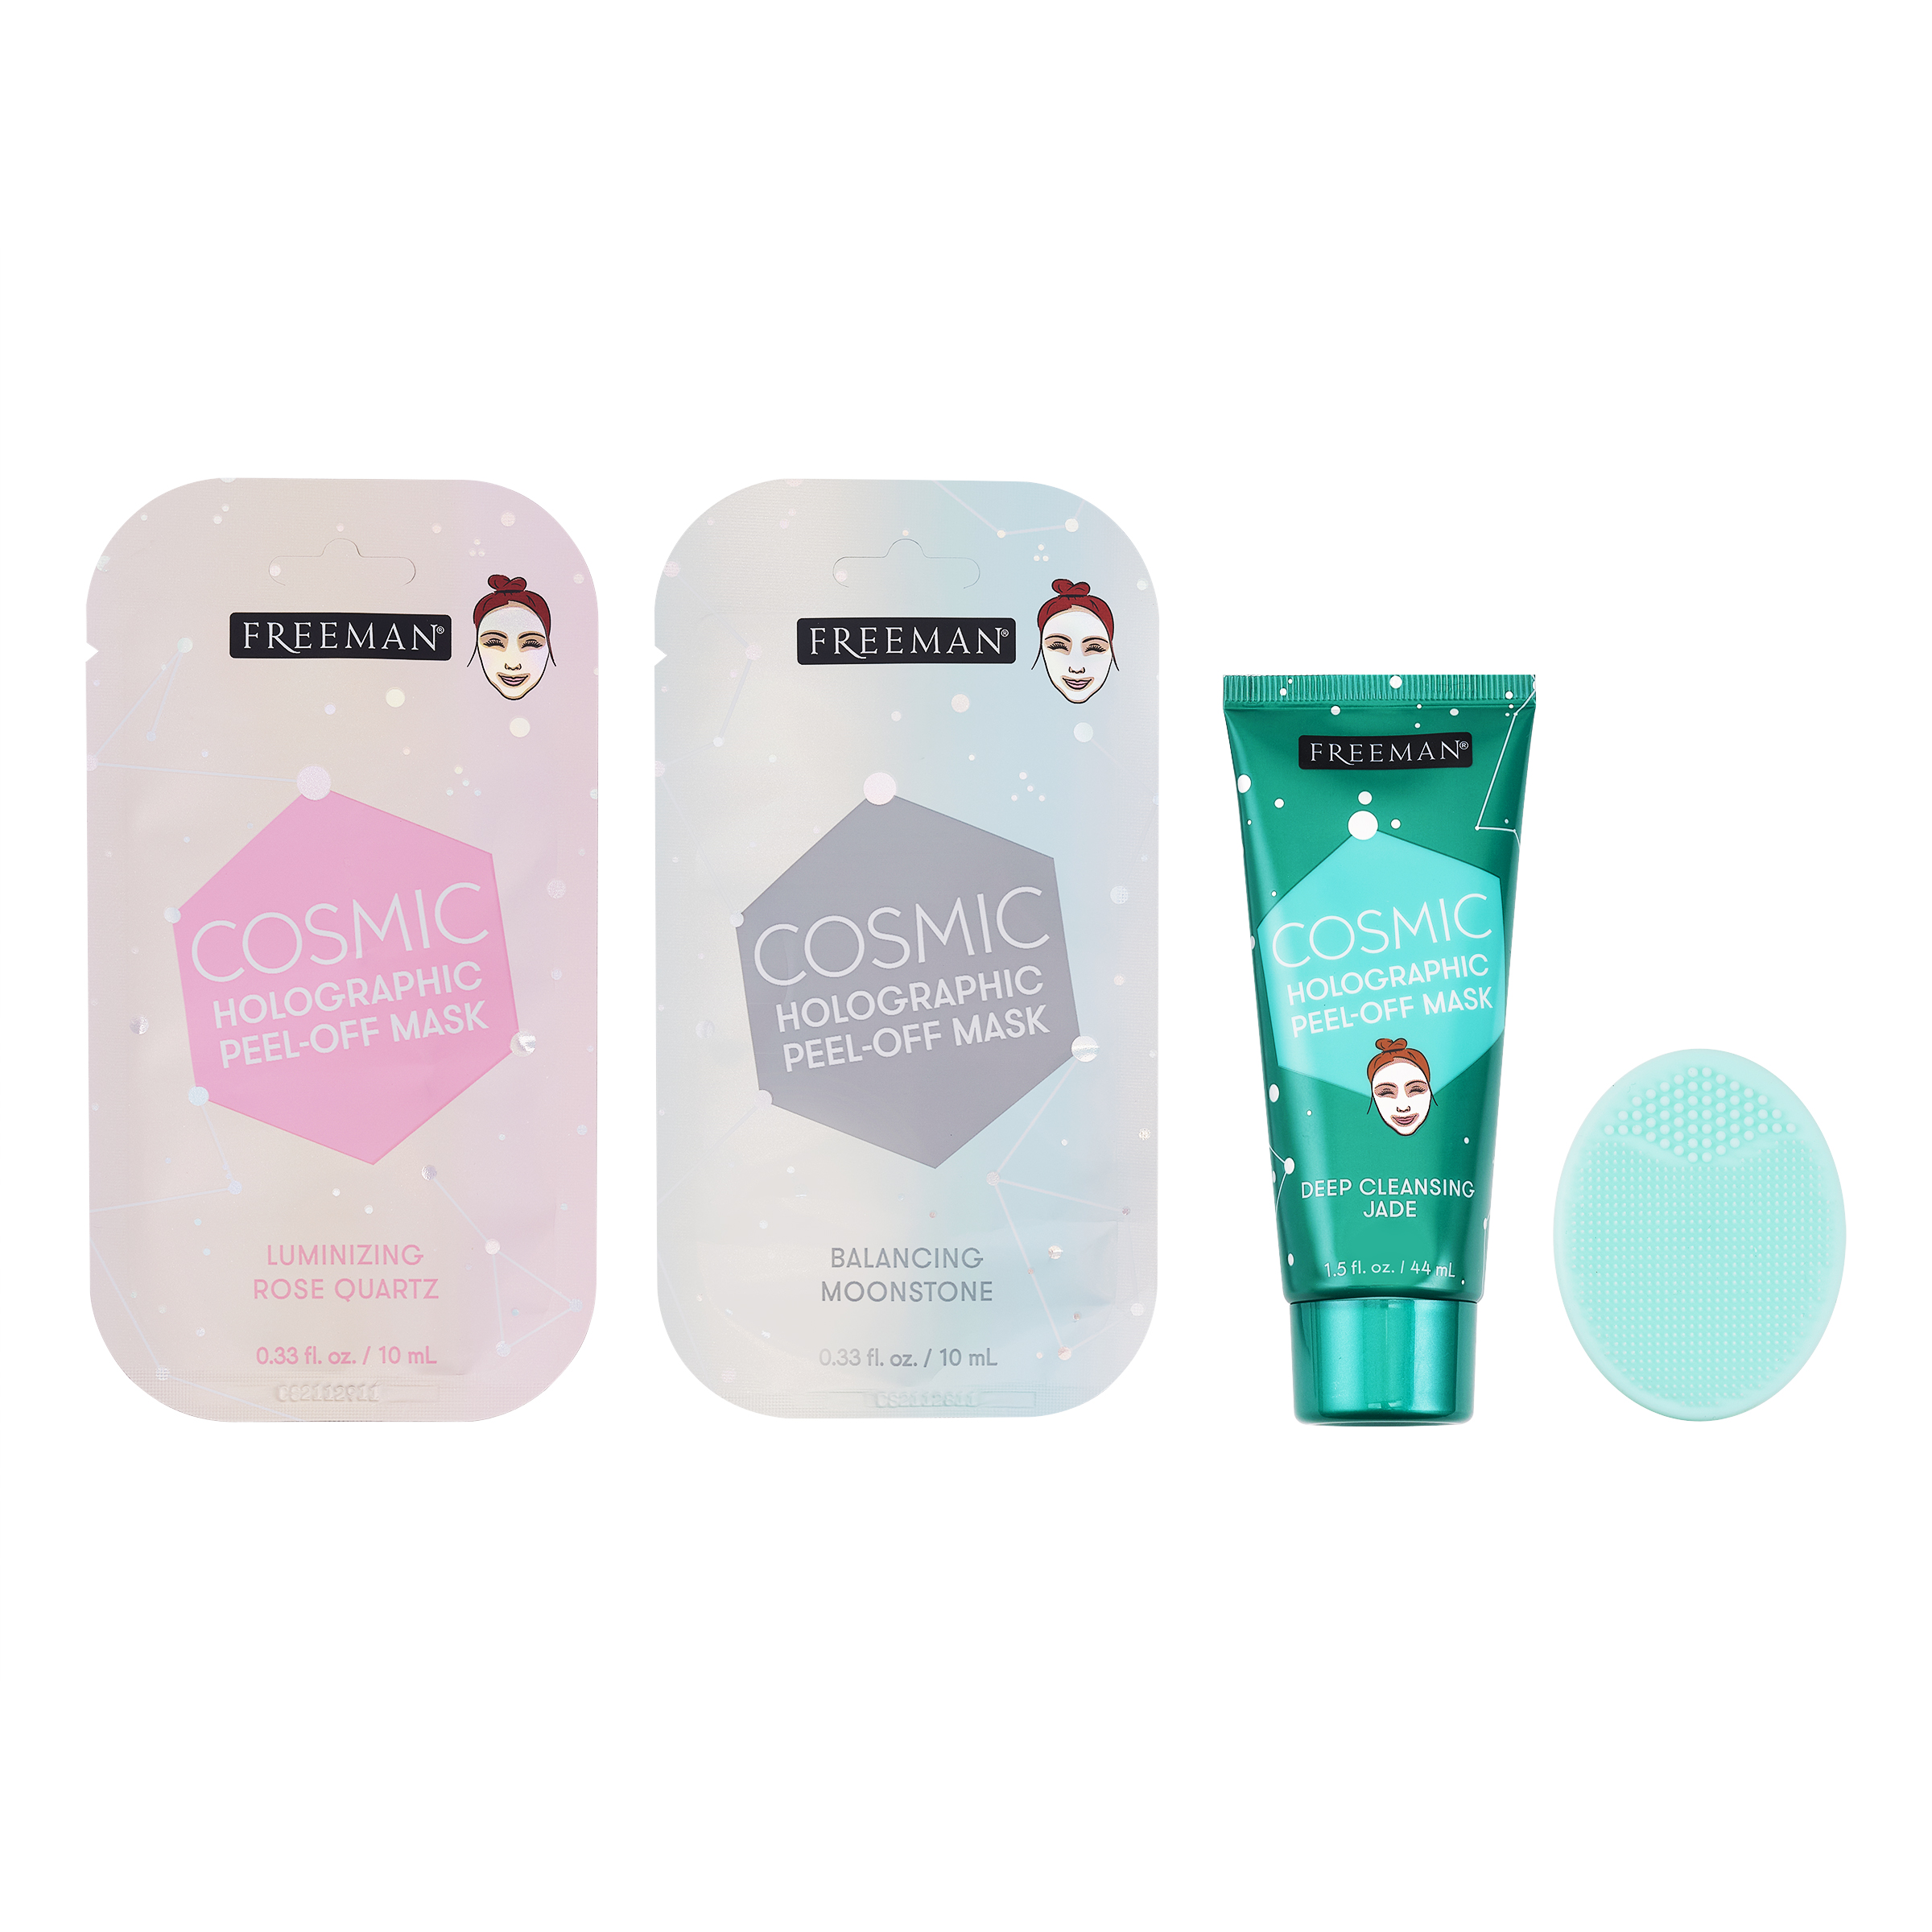 Freeman Limited Edition Cosmic Facial Mask Kit, Skincare Treatment Face Mask, 4 Piece Gift Set - image 2 of 6